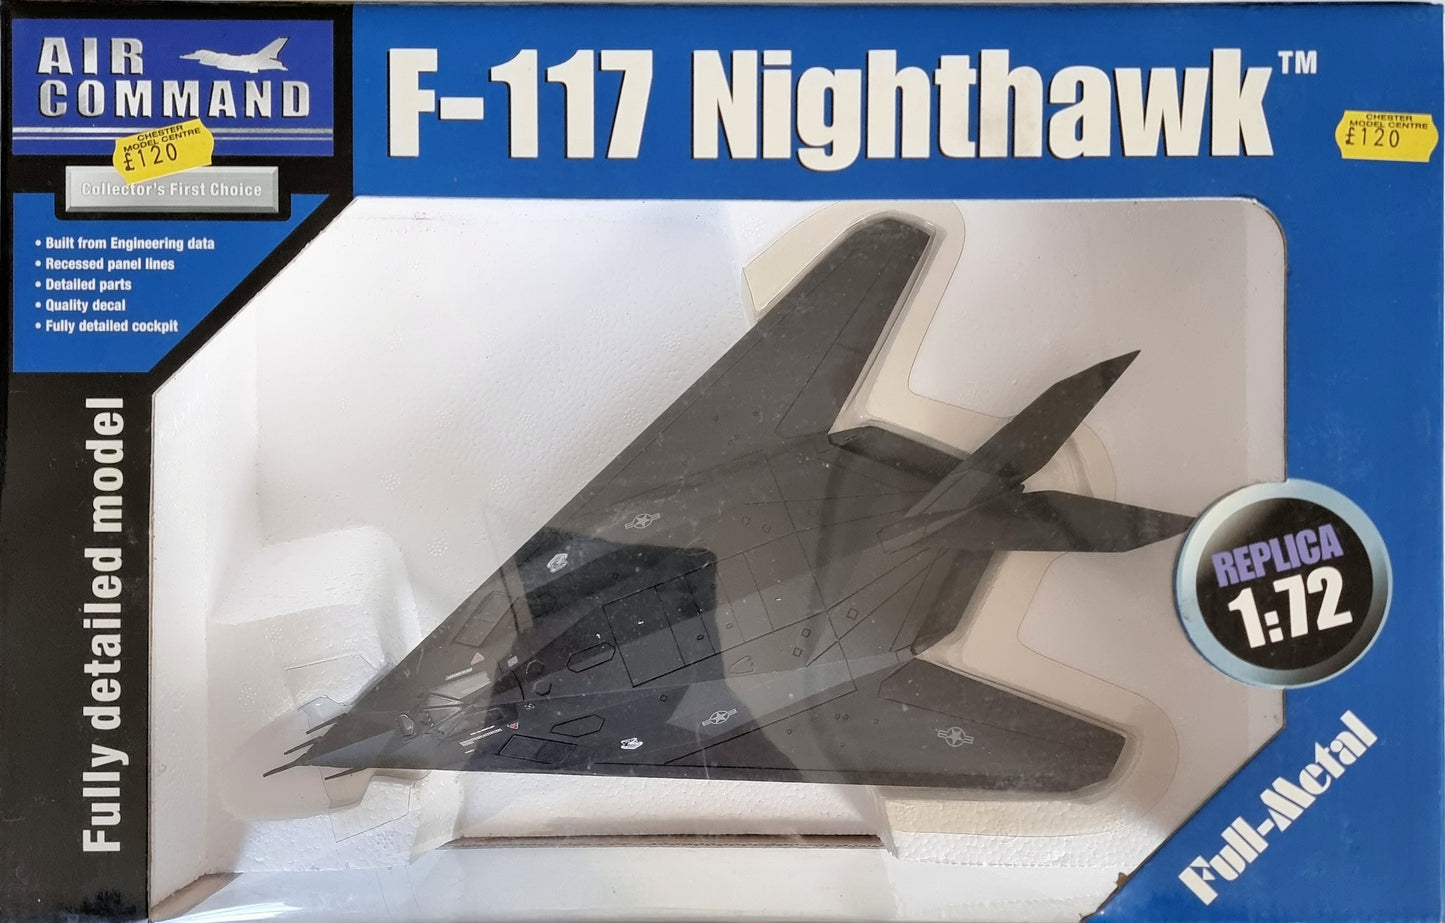 Sun Star Air Command Collectors First Choice 1:72 F-117 Nighthawk - Chester Model Centre